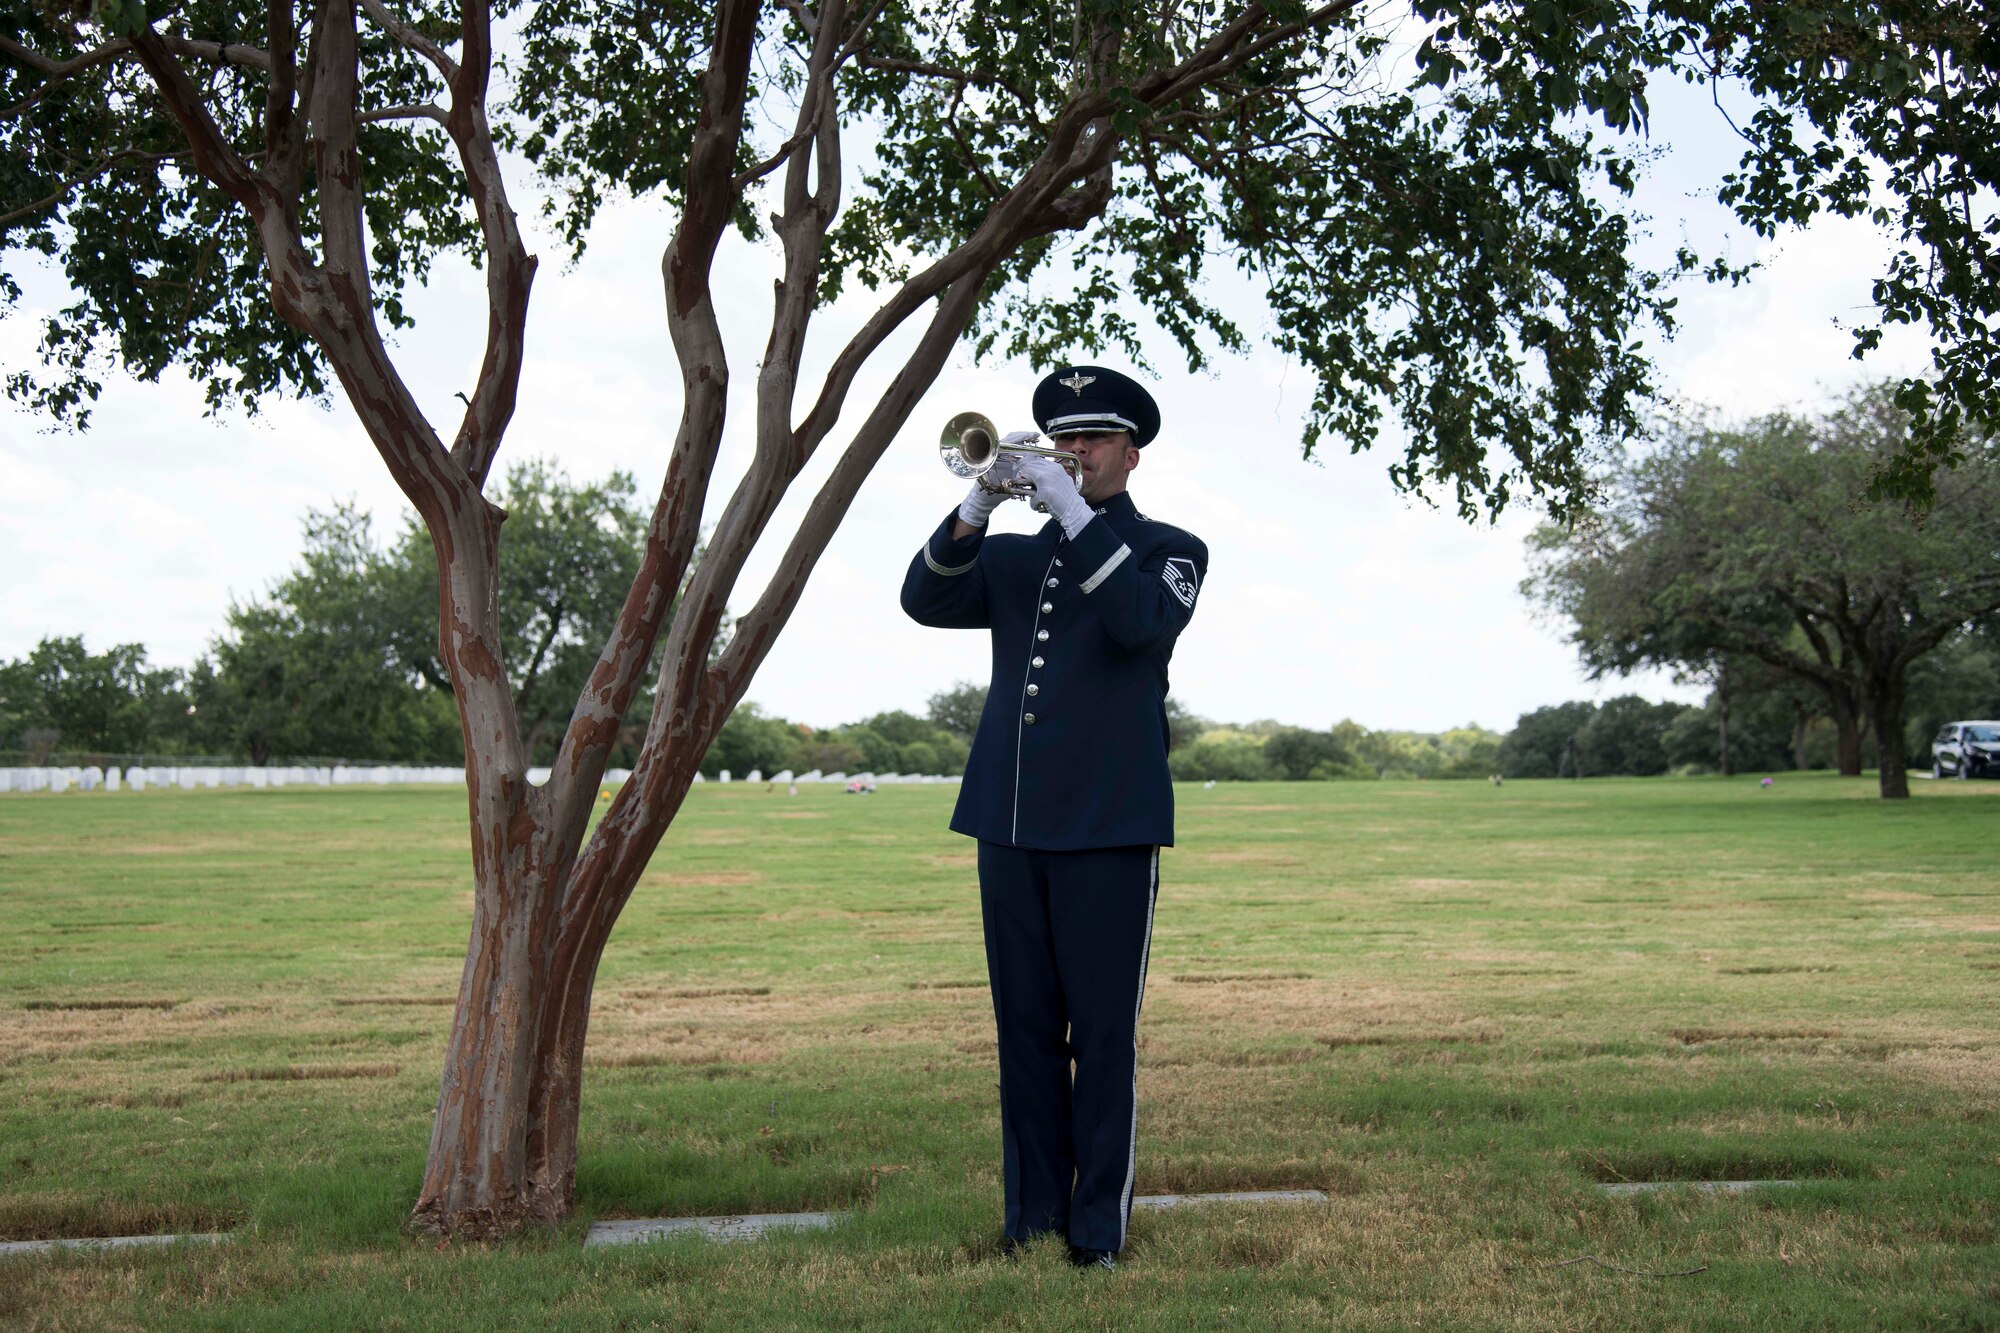 A U.S. Air Force Honor Guard Airman plays "Taps" during the funeral ceremony of Oliver "Ollie" Crawford Aug. 5, 2019, at Joint Base San Antonio-Fort Sam Houston, Texas. "Ollie" passed away at the age of 94, on Sunday, July 21, 2019 in San Antonio, Texas.